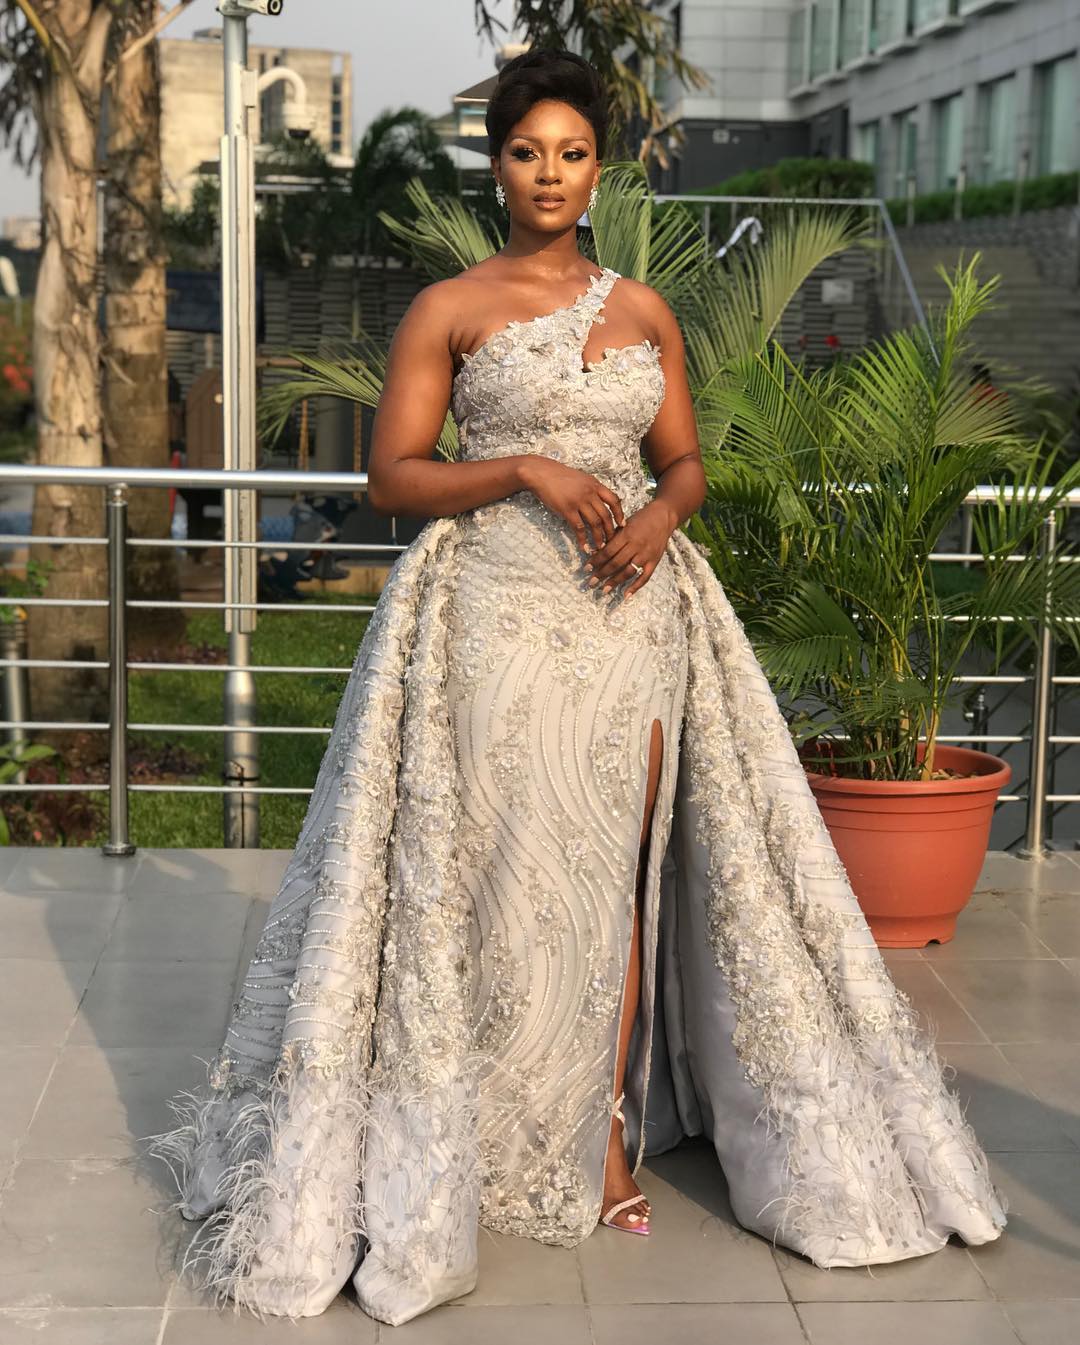 Osas Ighodaro Ajibade looks amazing in a silver coloured gown.